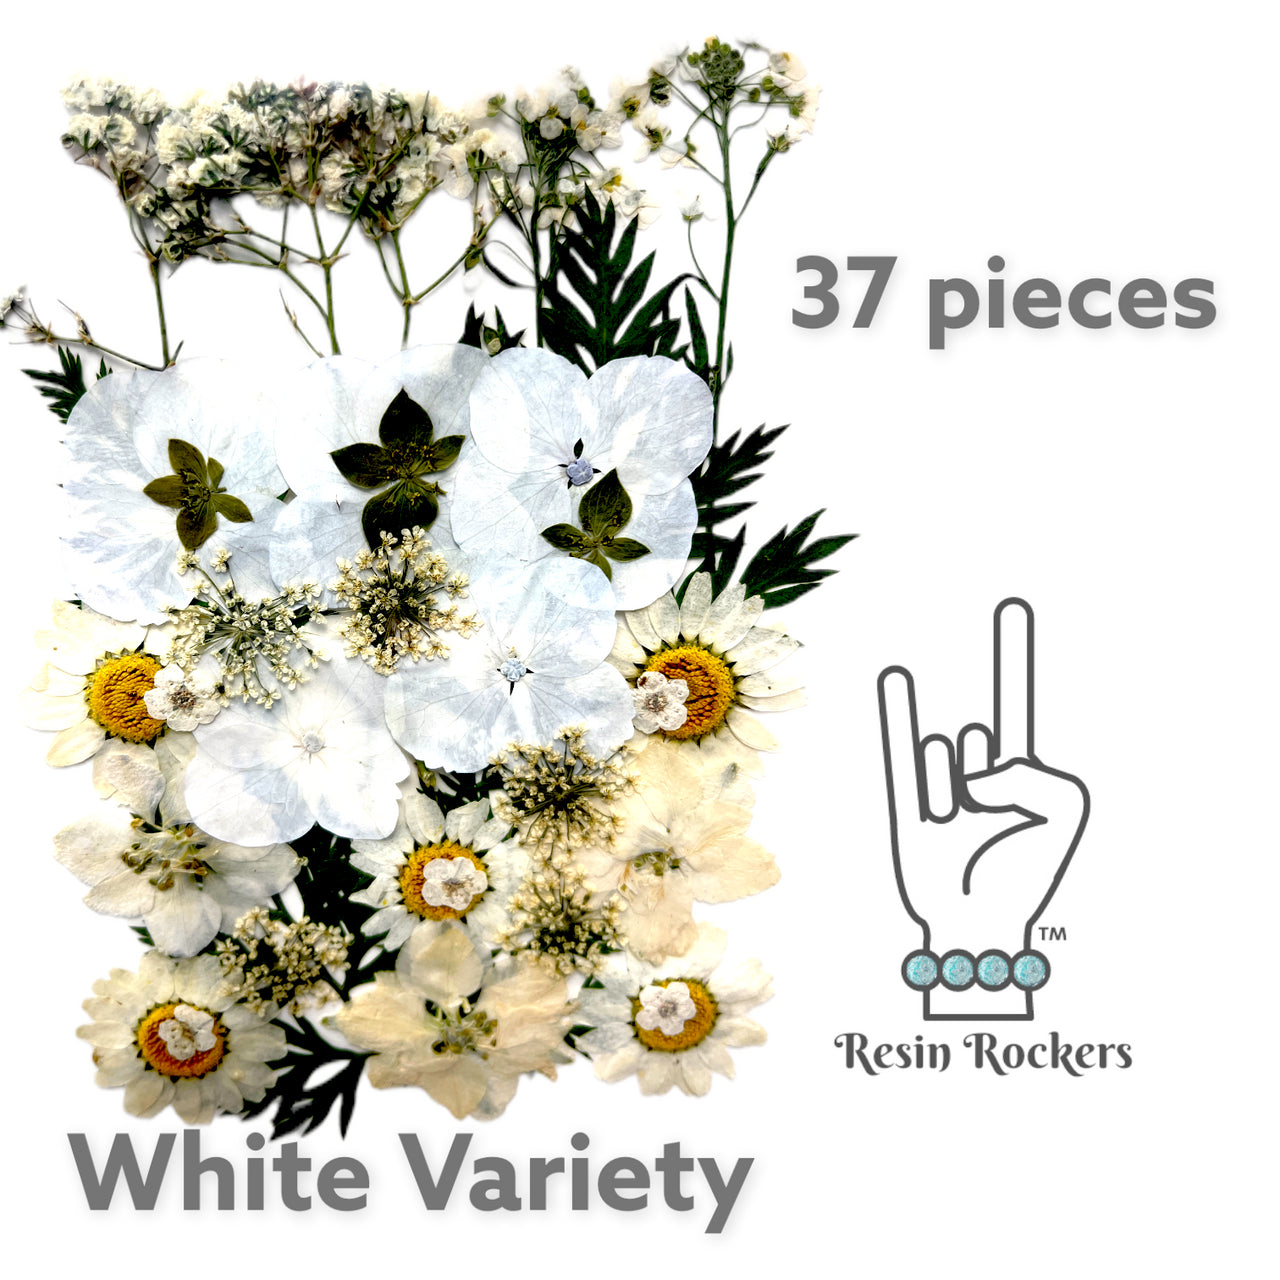 37 Piece White Variety Dried Pressed Real Natural Flowers For Epoxy & UV Resin Art